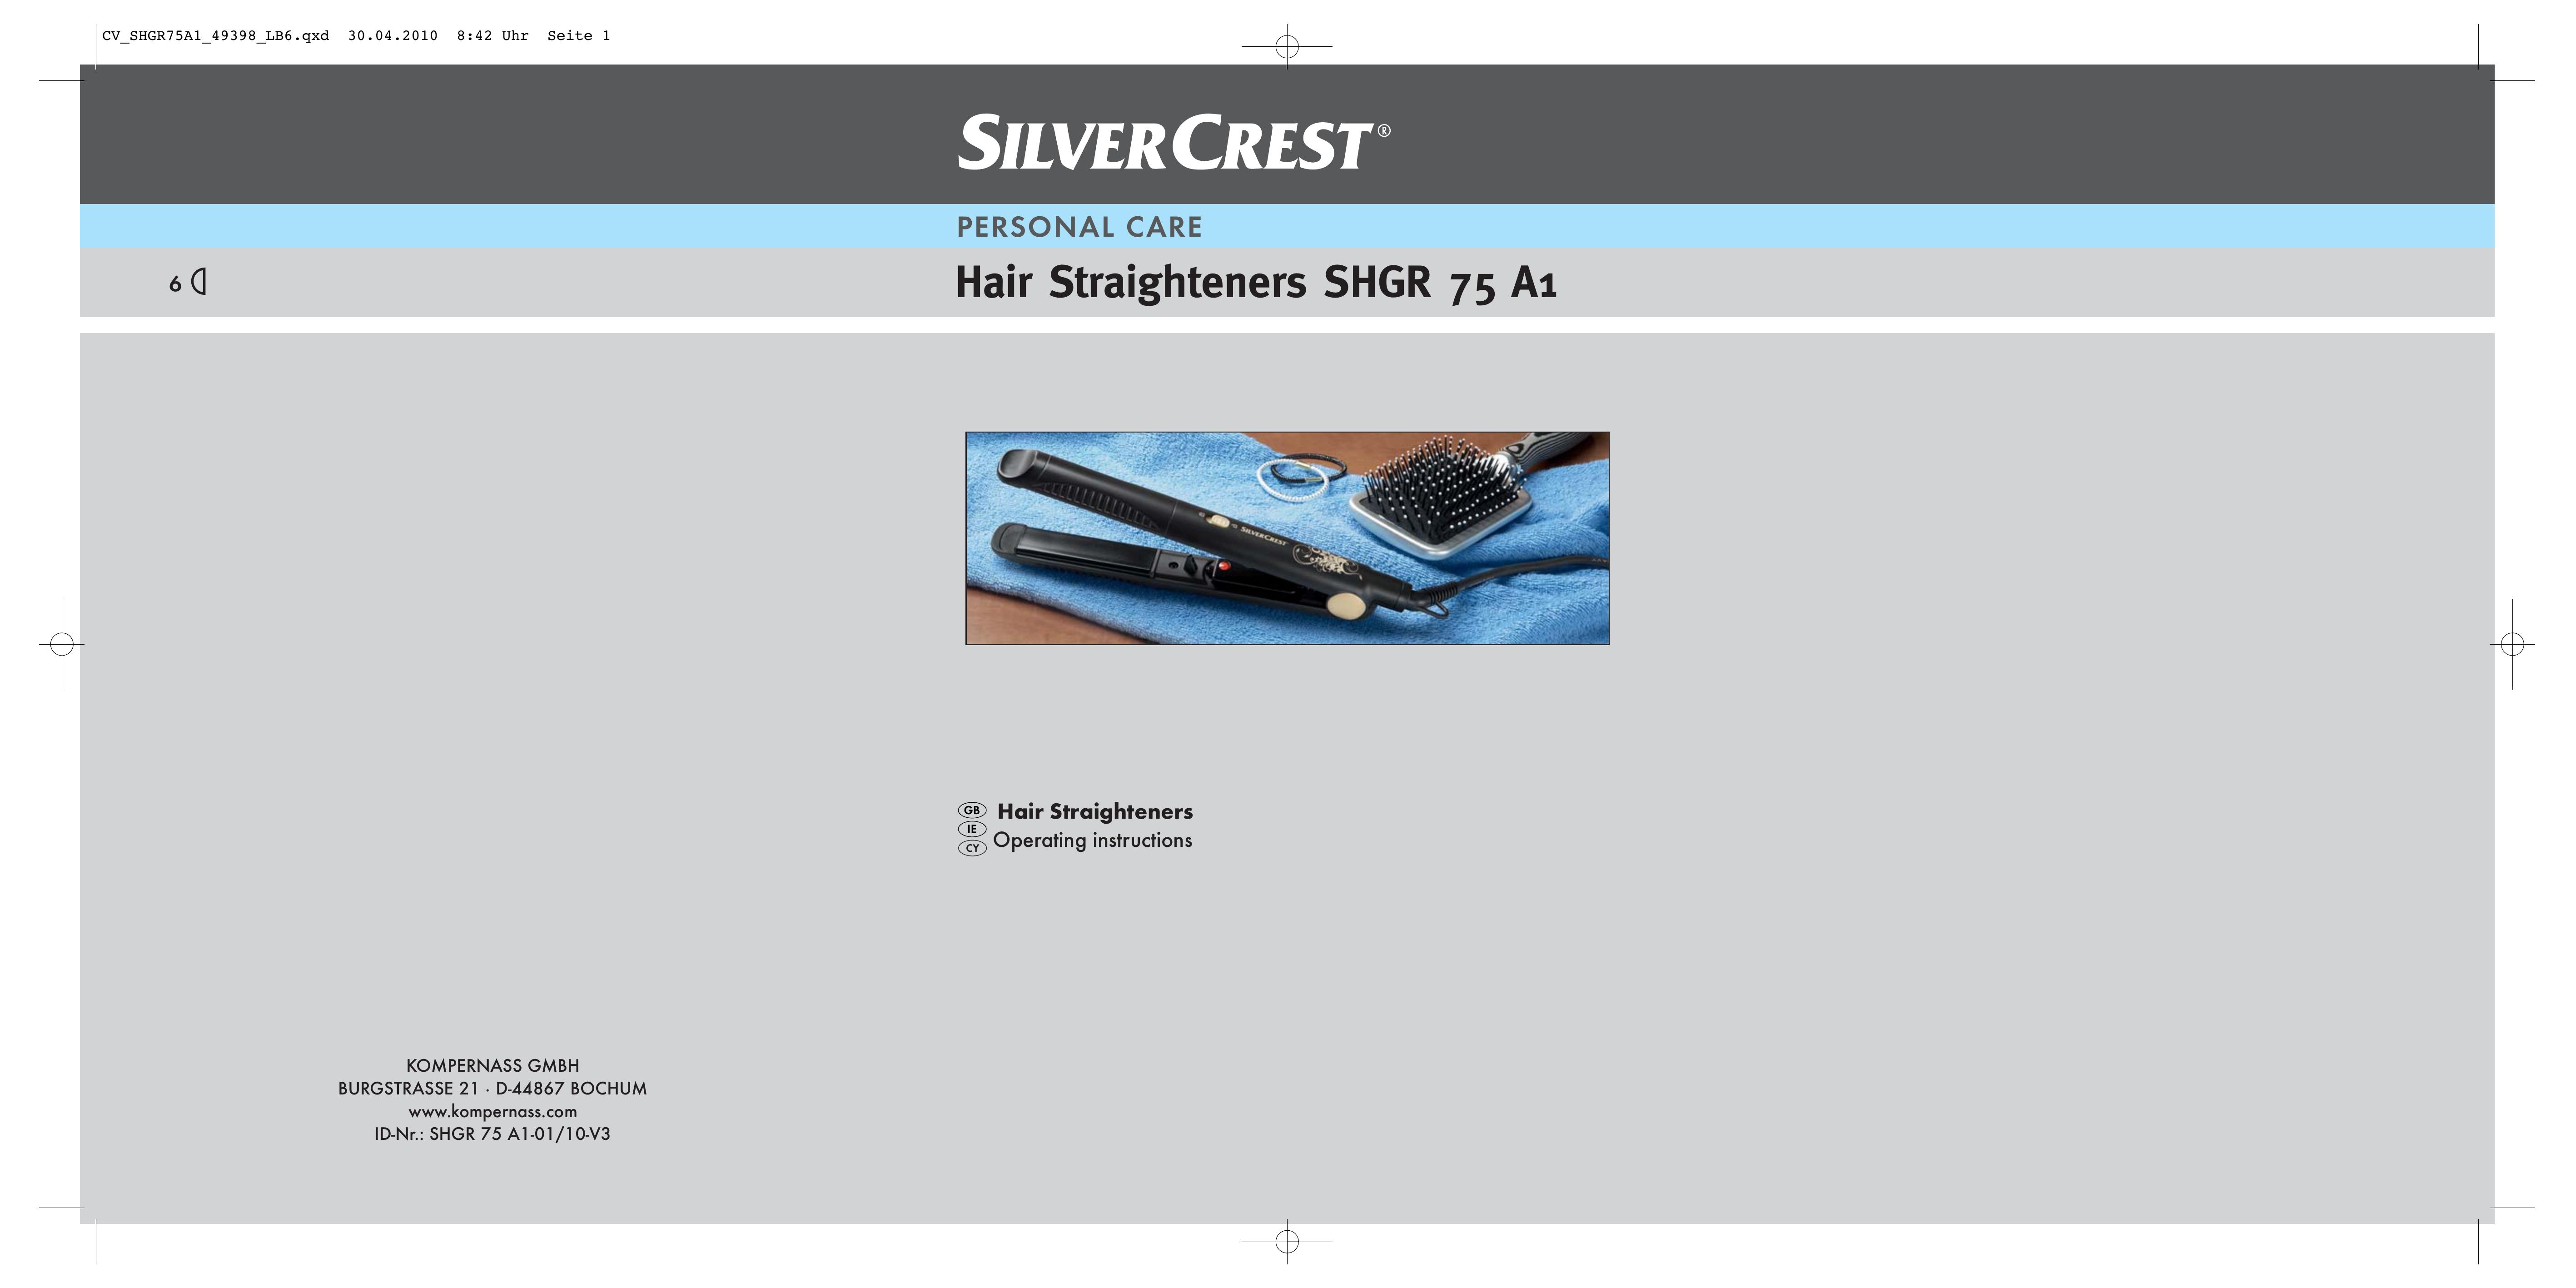 Silvercrest SHGR 75 A1 Hair Care Product User Manual